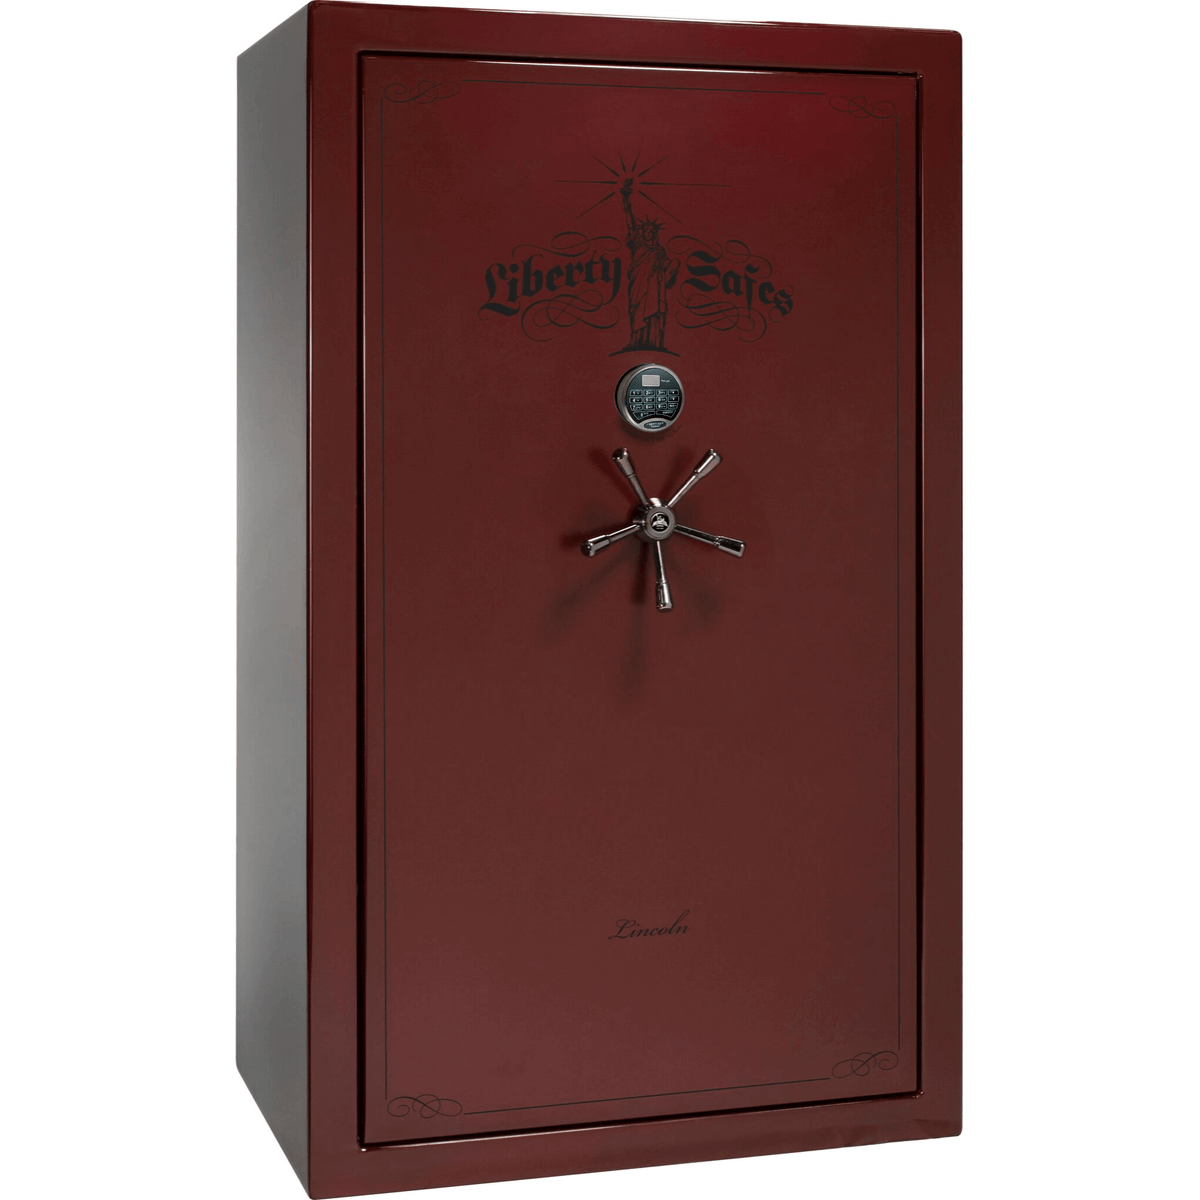 Liberty Lincoln 50 Safe in Burgundy Gloss with Black Chrome Electronic Lock.